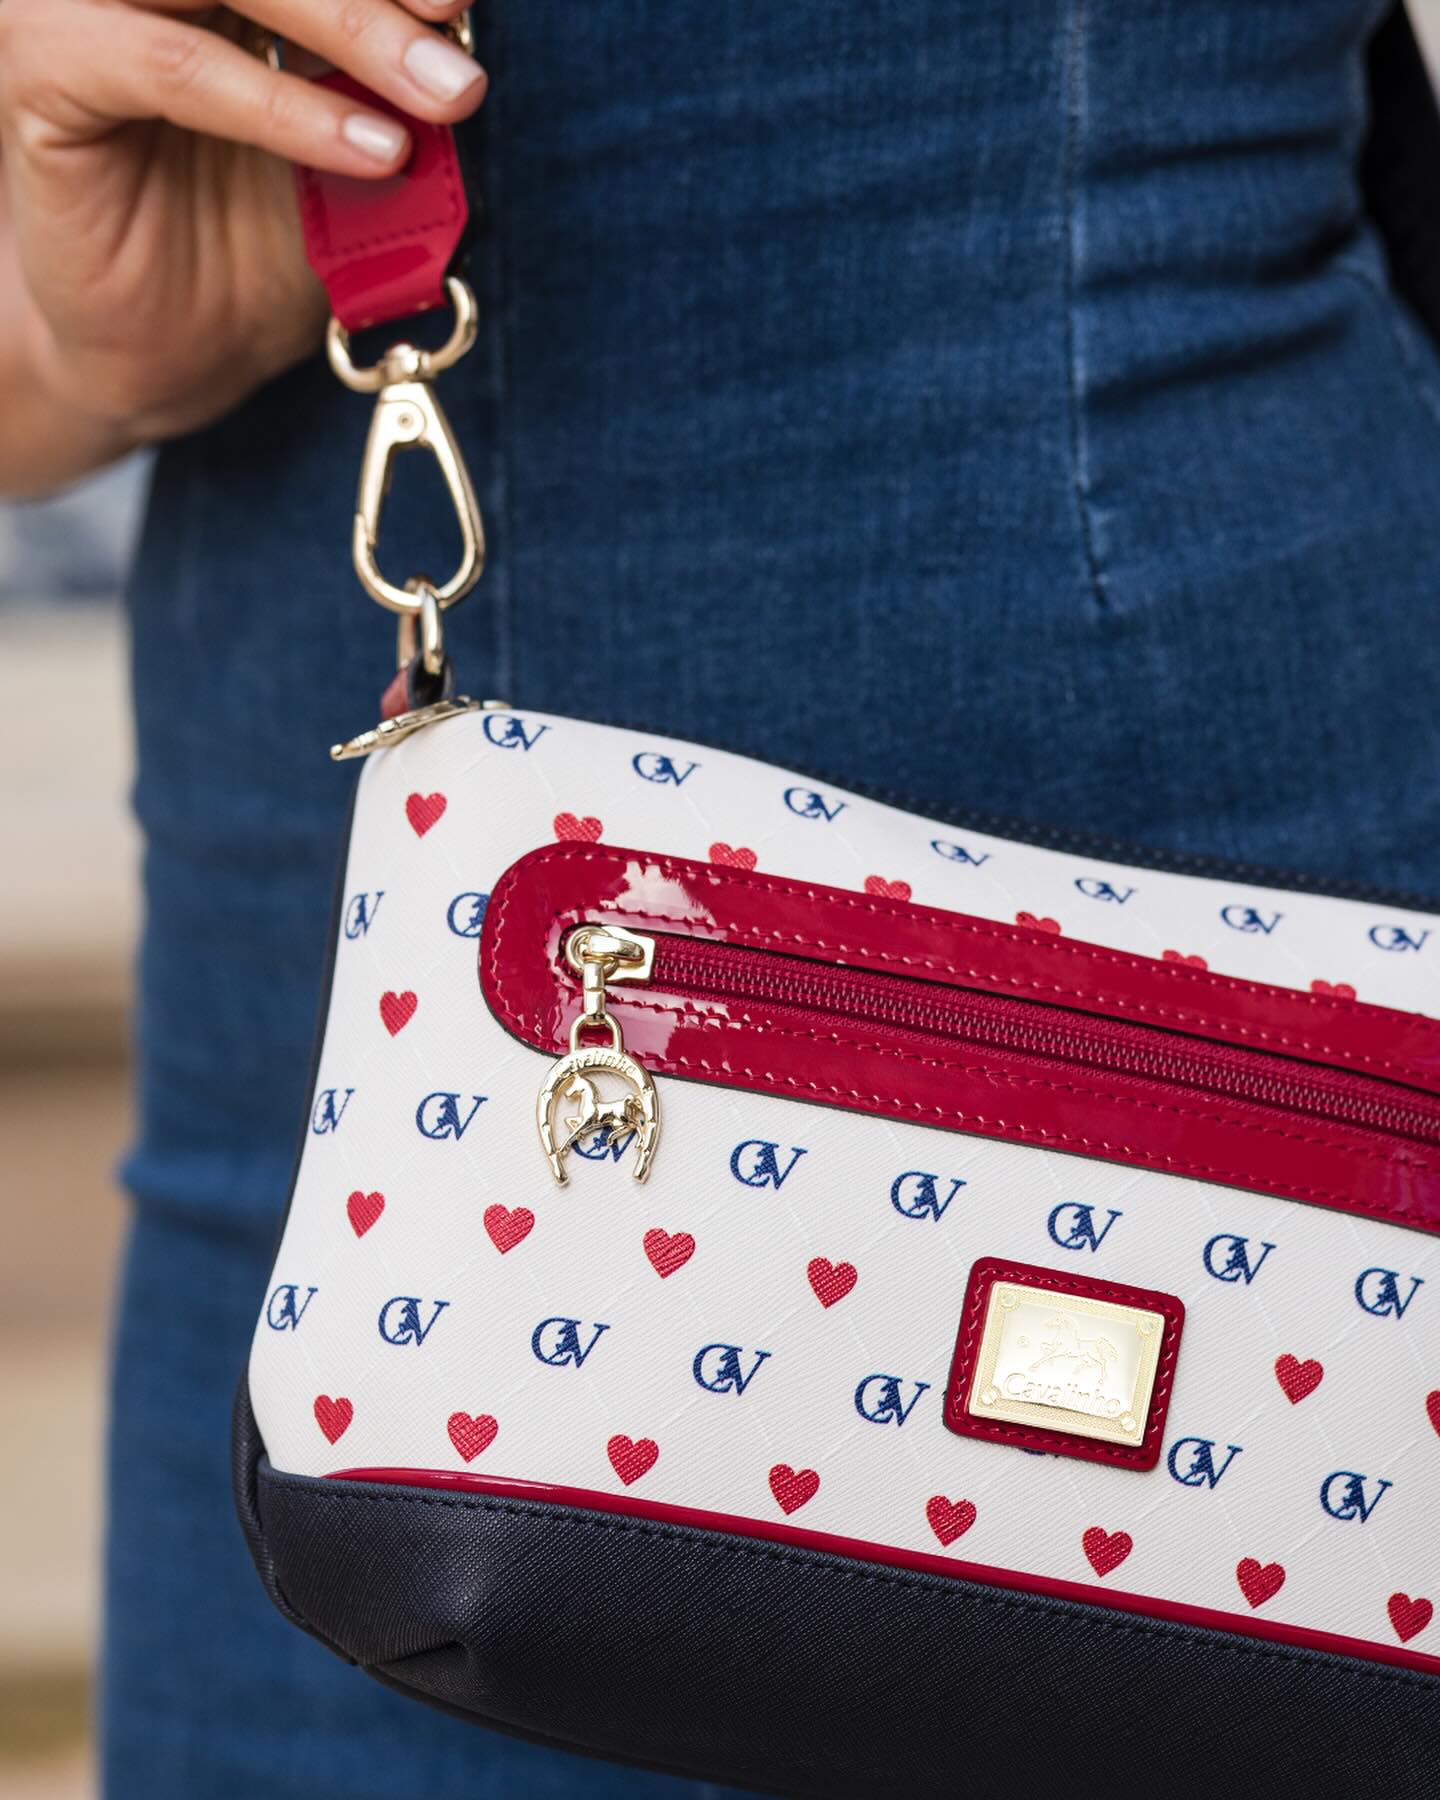 #color_ Navy White Red | Cavalinho Love Yourself Crossbody Bag - Navy White Red - 426293148_18412433566000514_2897121530237127126_n